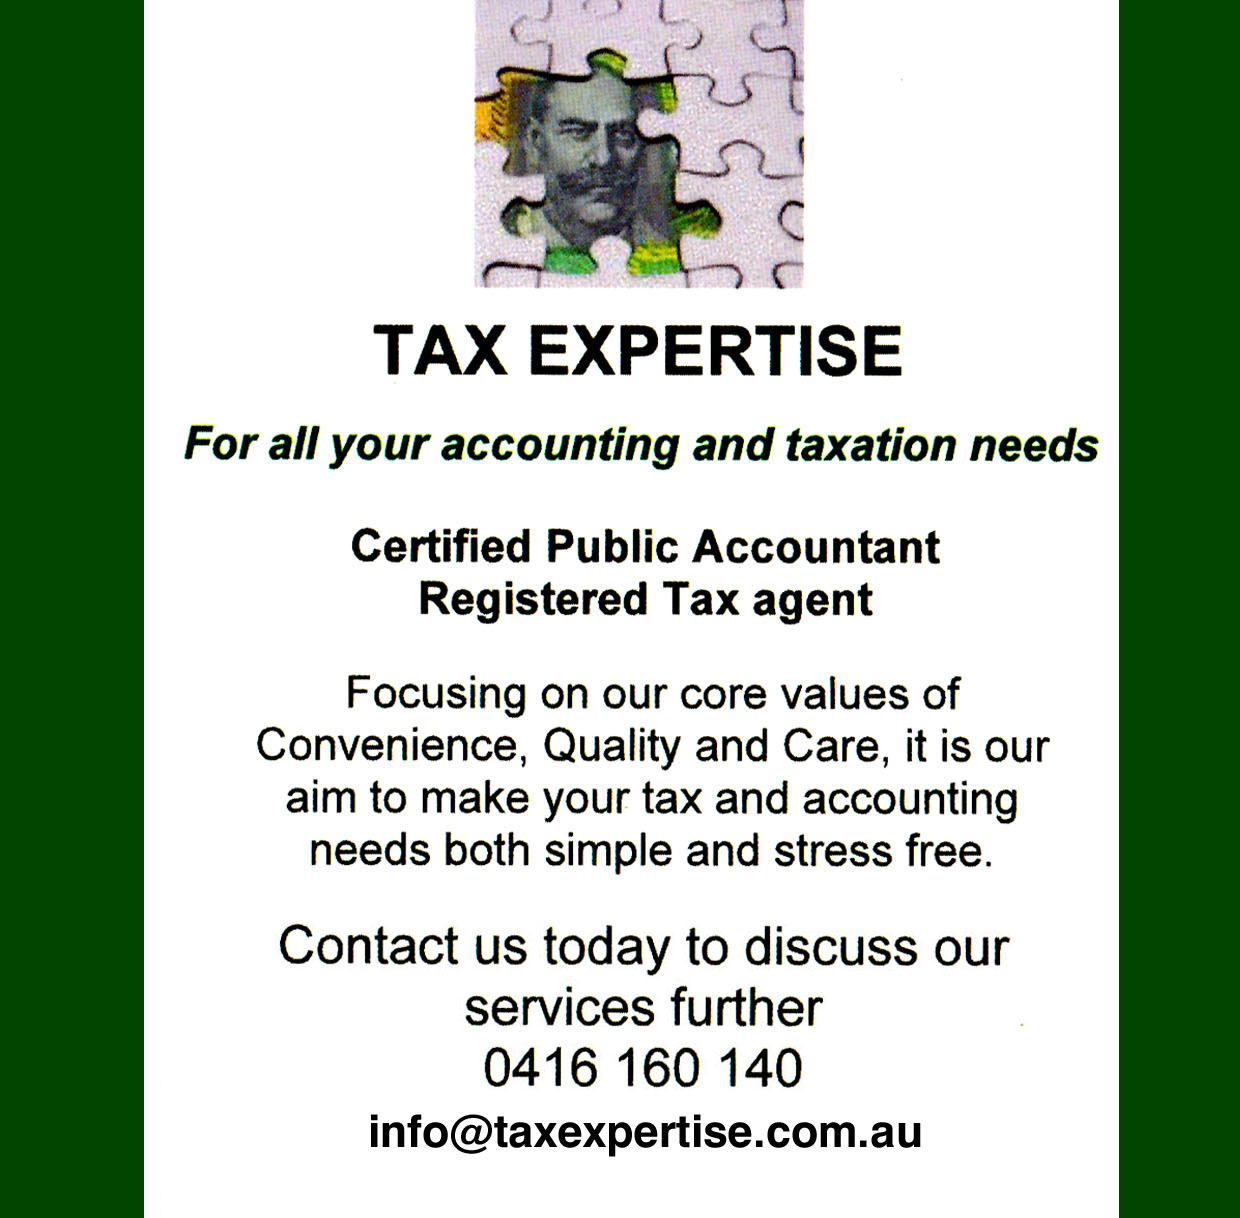 Tax Expertise